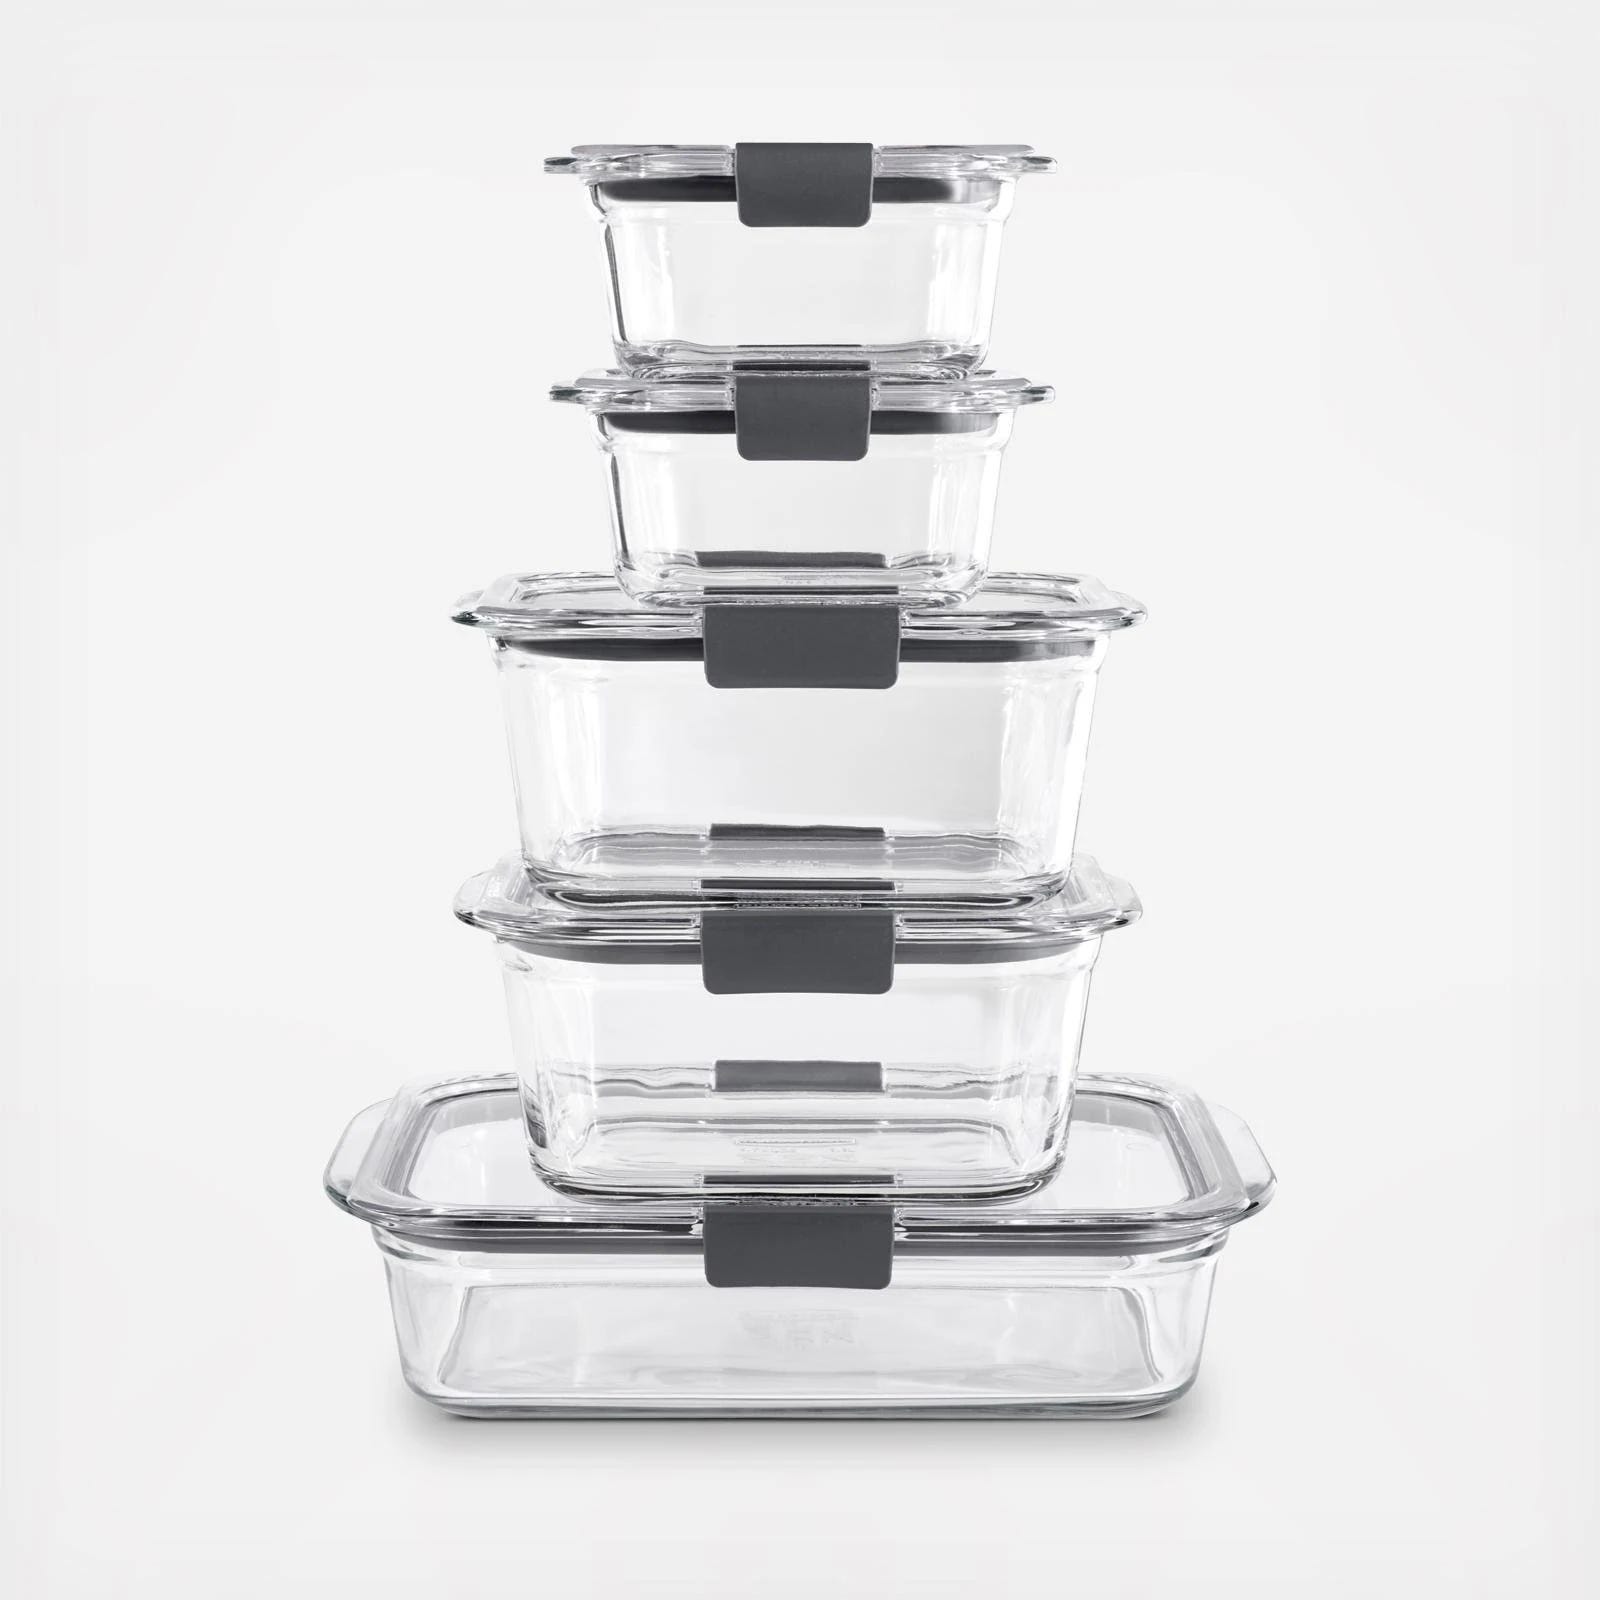 Rubbermaid Brilliance Glass Food Containers with Crystal-Clear Lids and Universal Lids | Image